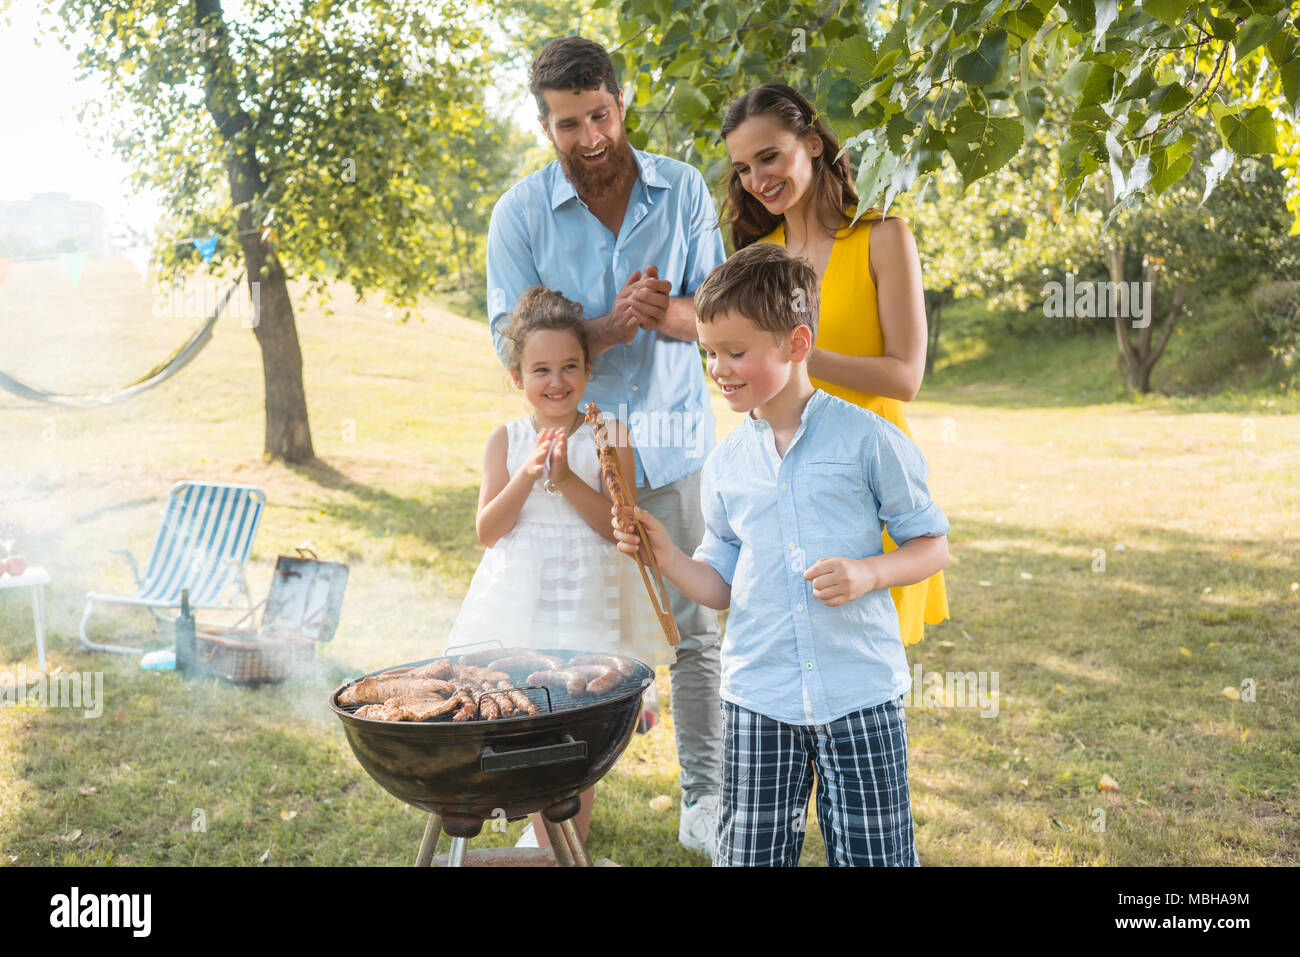 Portrait of happy family with two children standing outdoors near barbecue Stock Photo